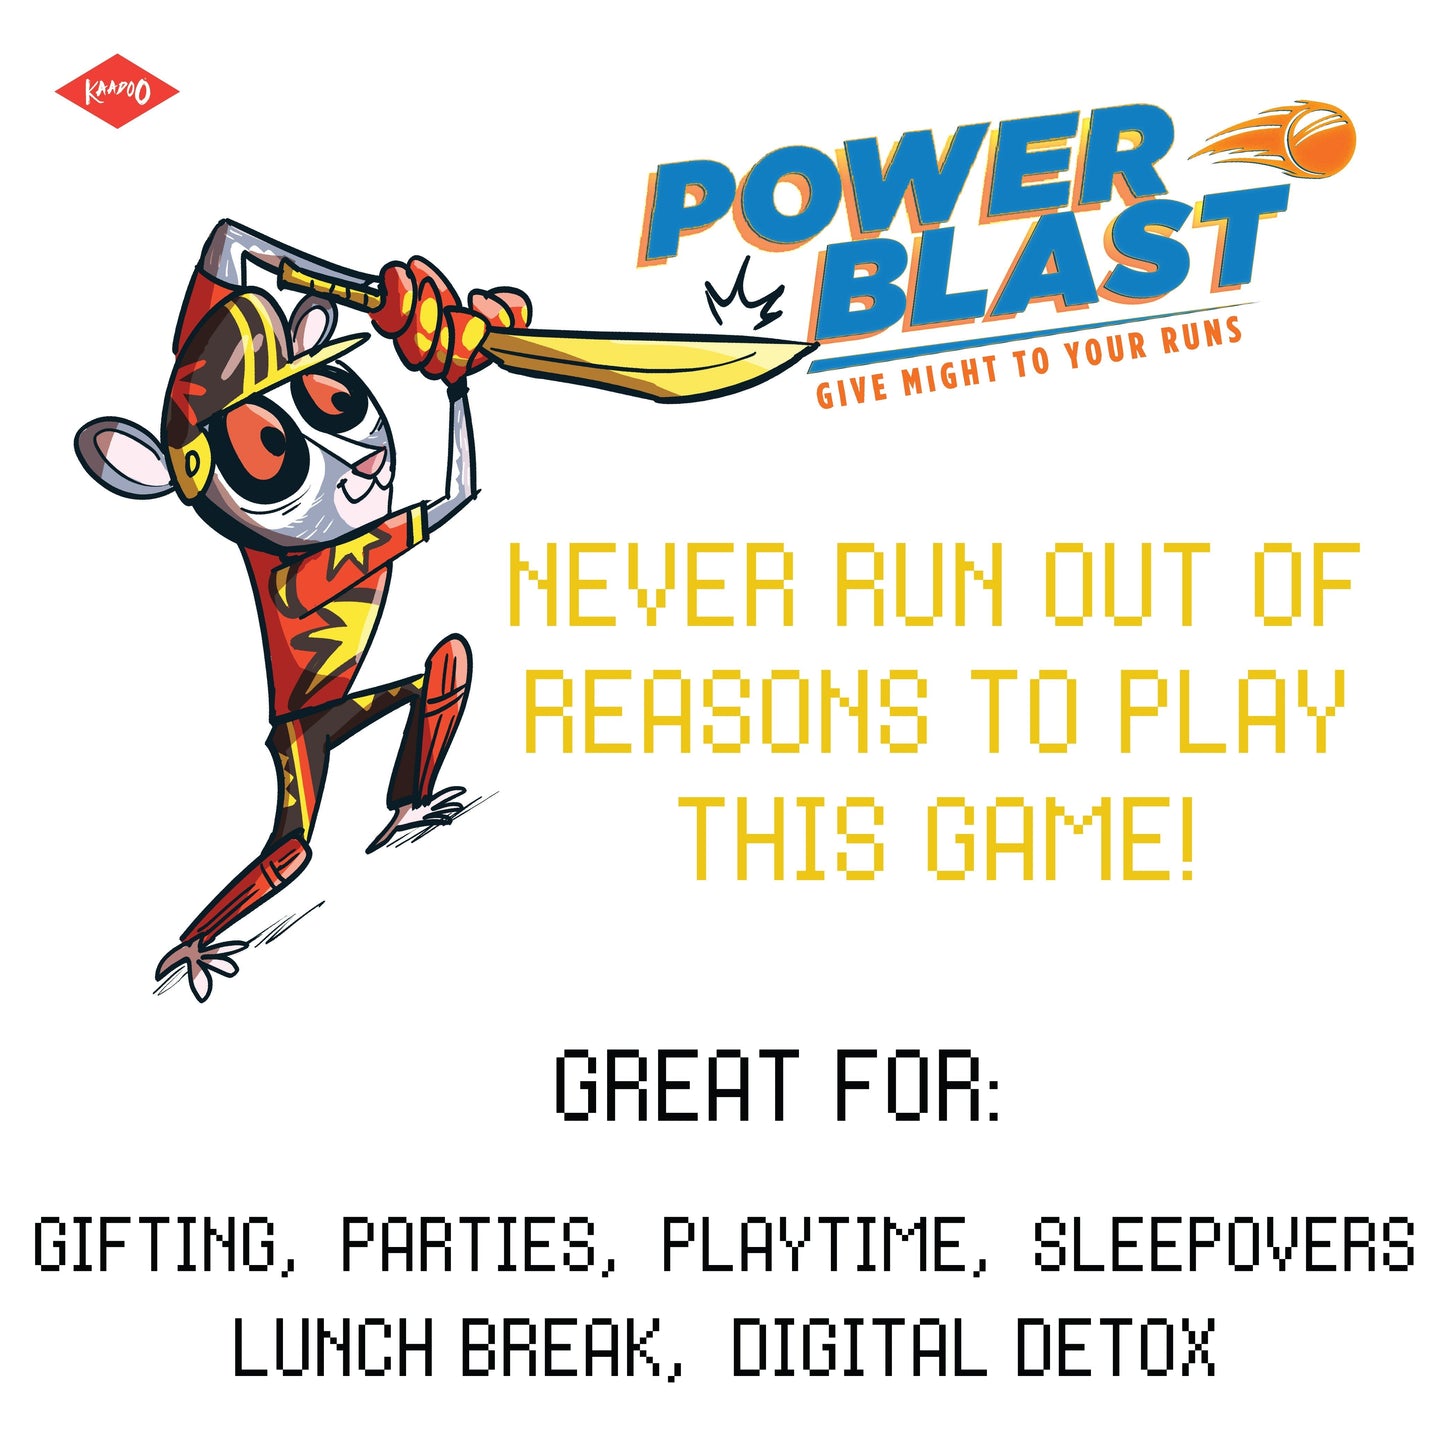 POWER BLAST Card Game – Give Might to Your Runs (Pack of 25)